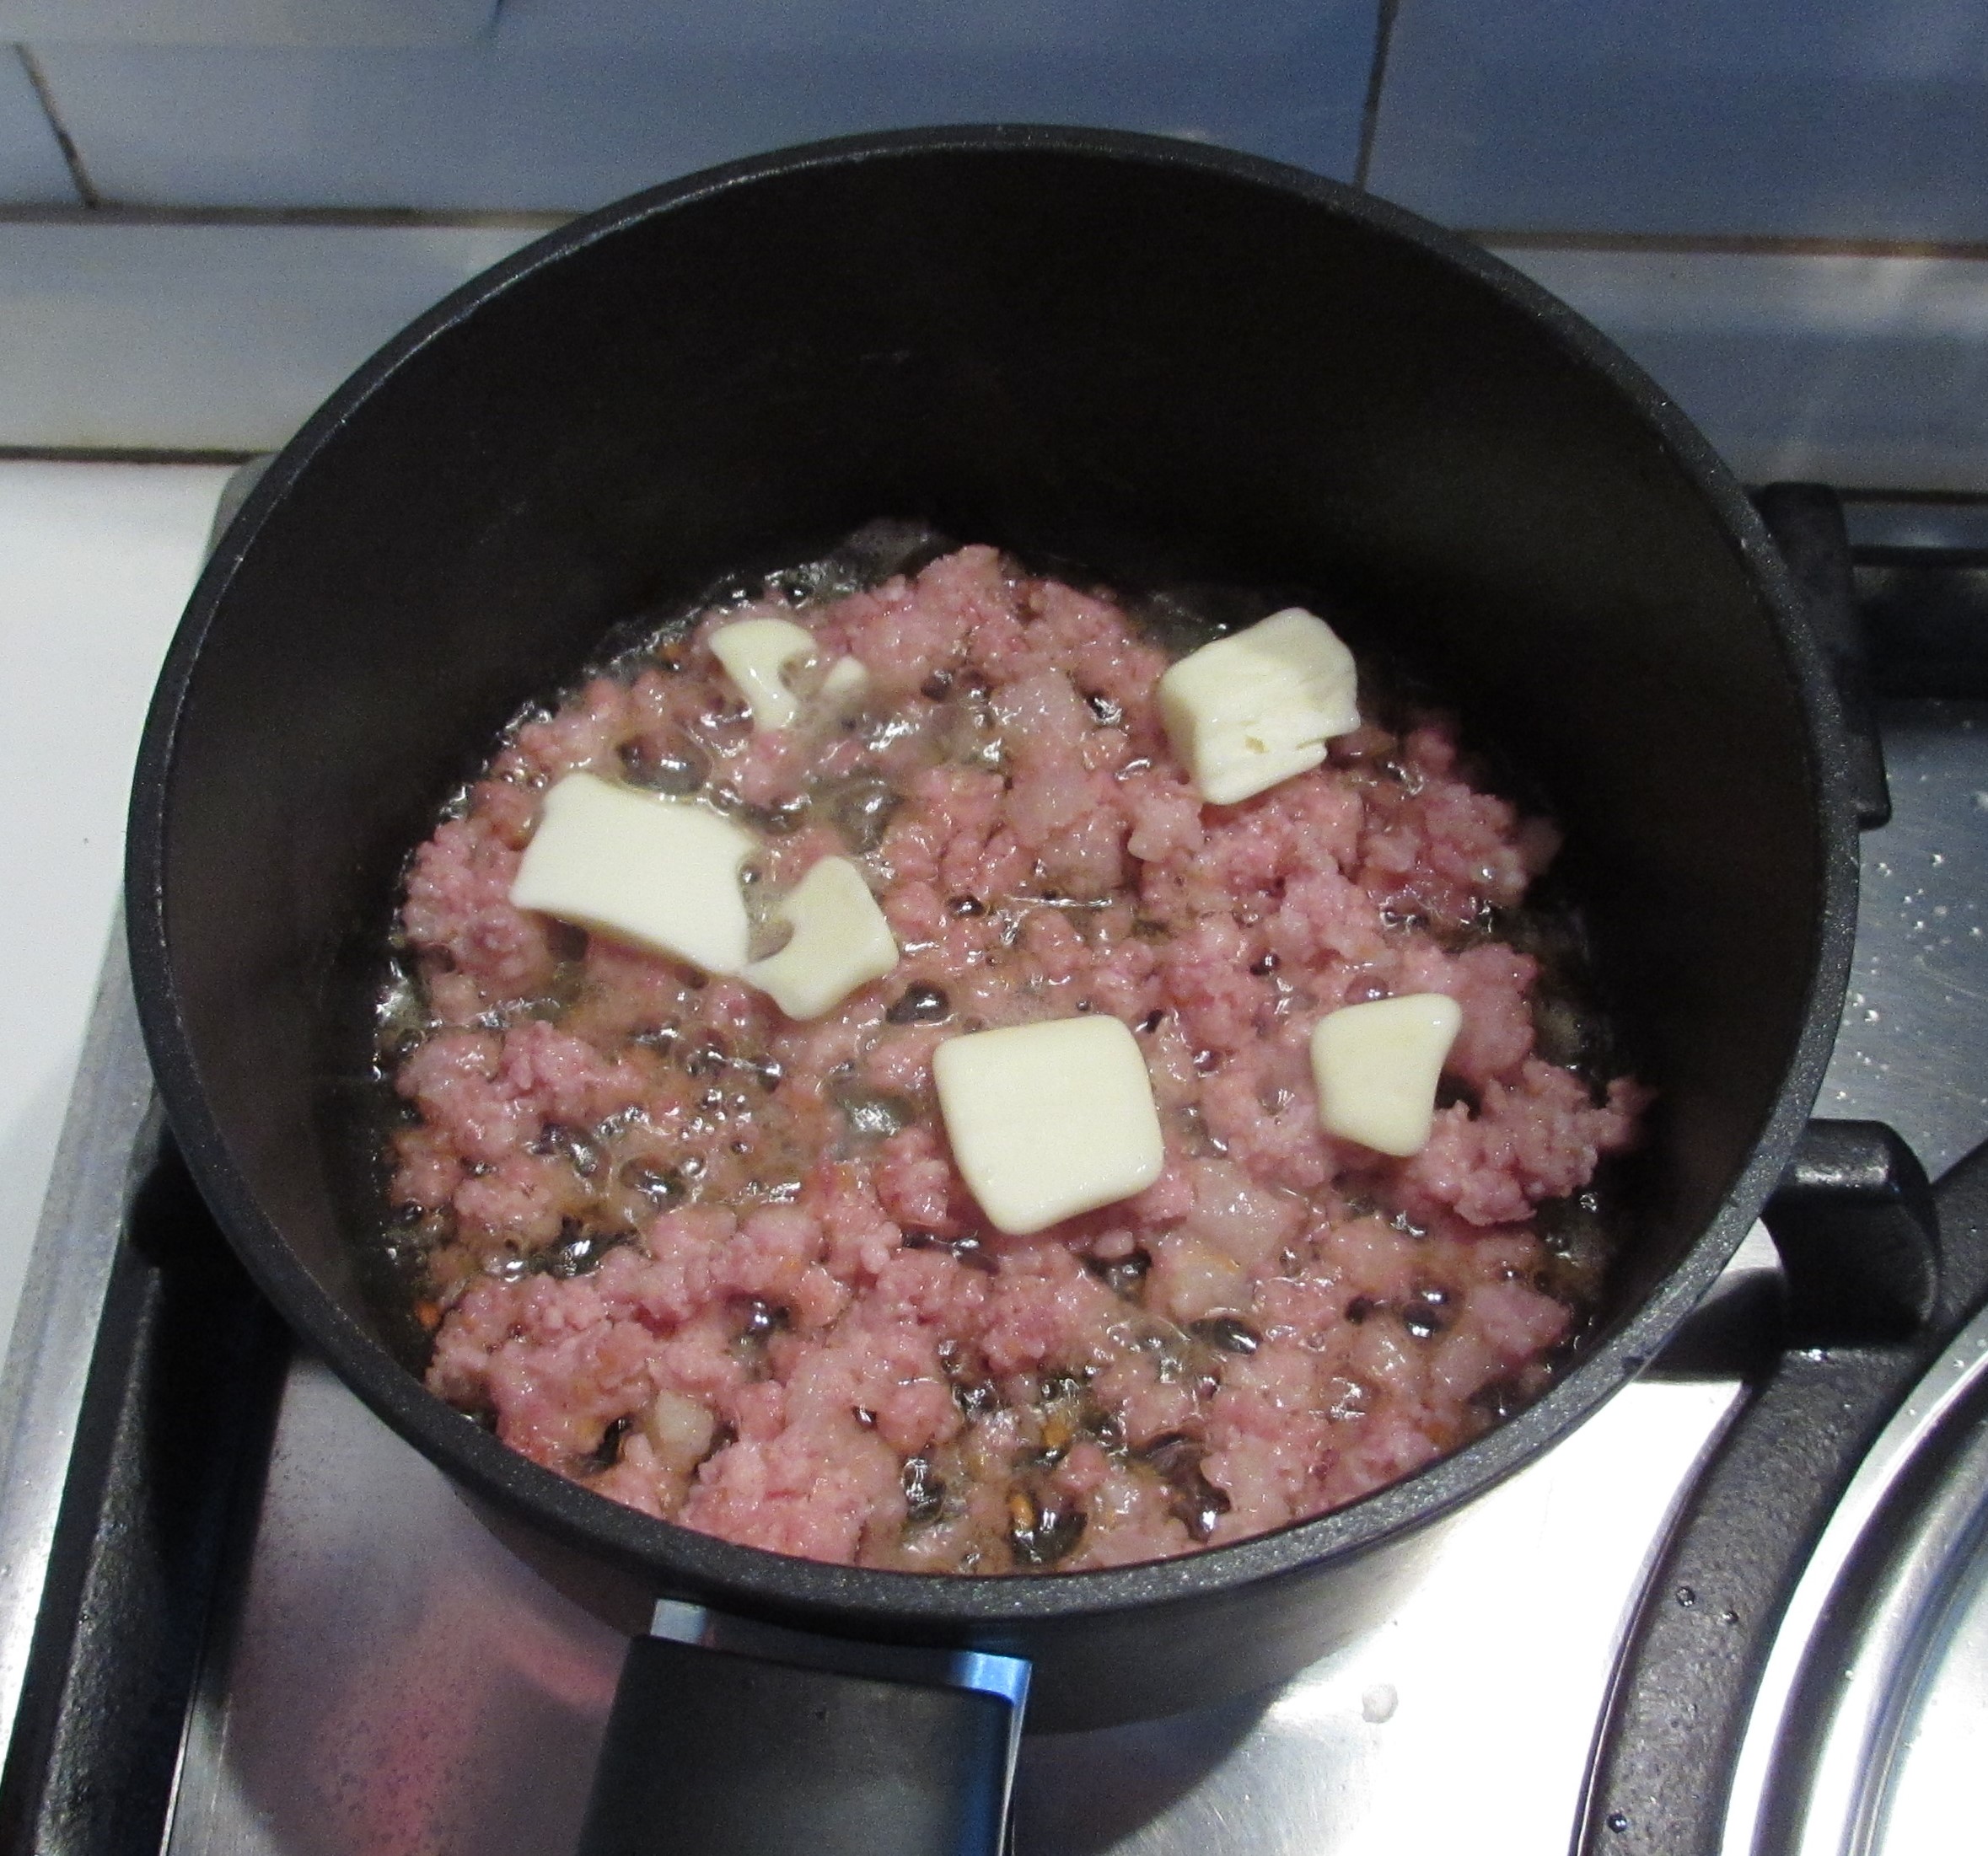 Chopped bacon for slowcooker bolognese sauce